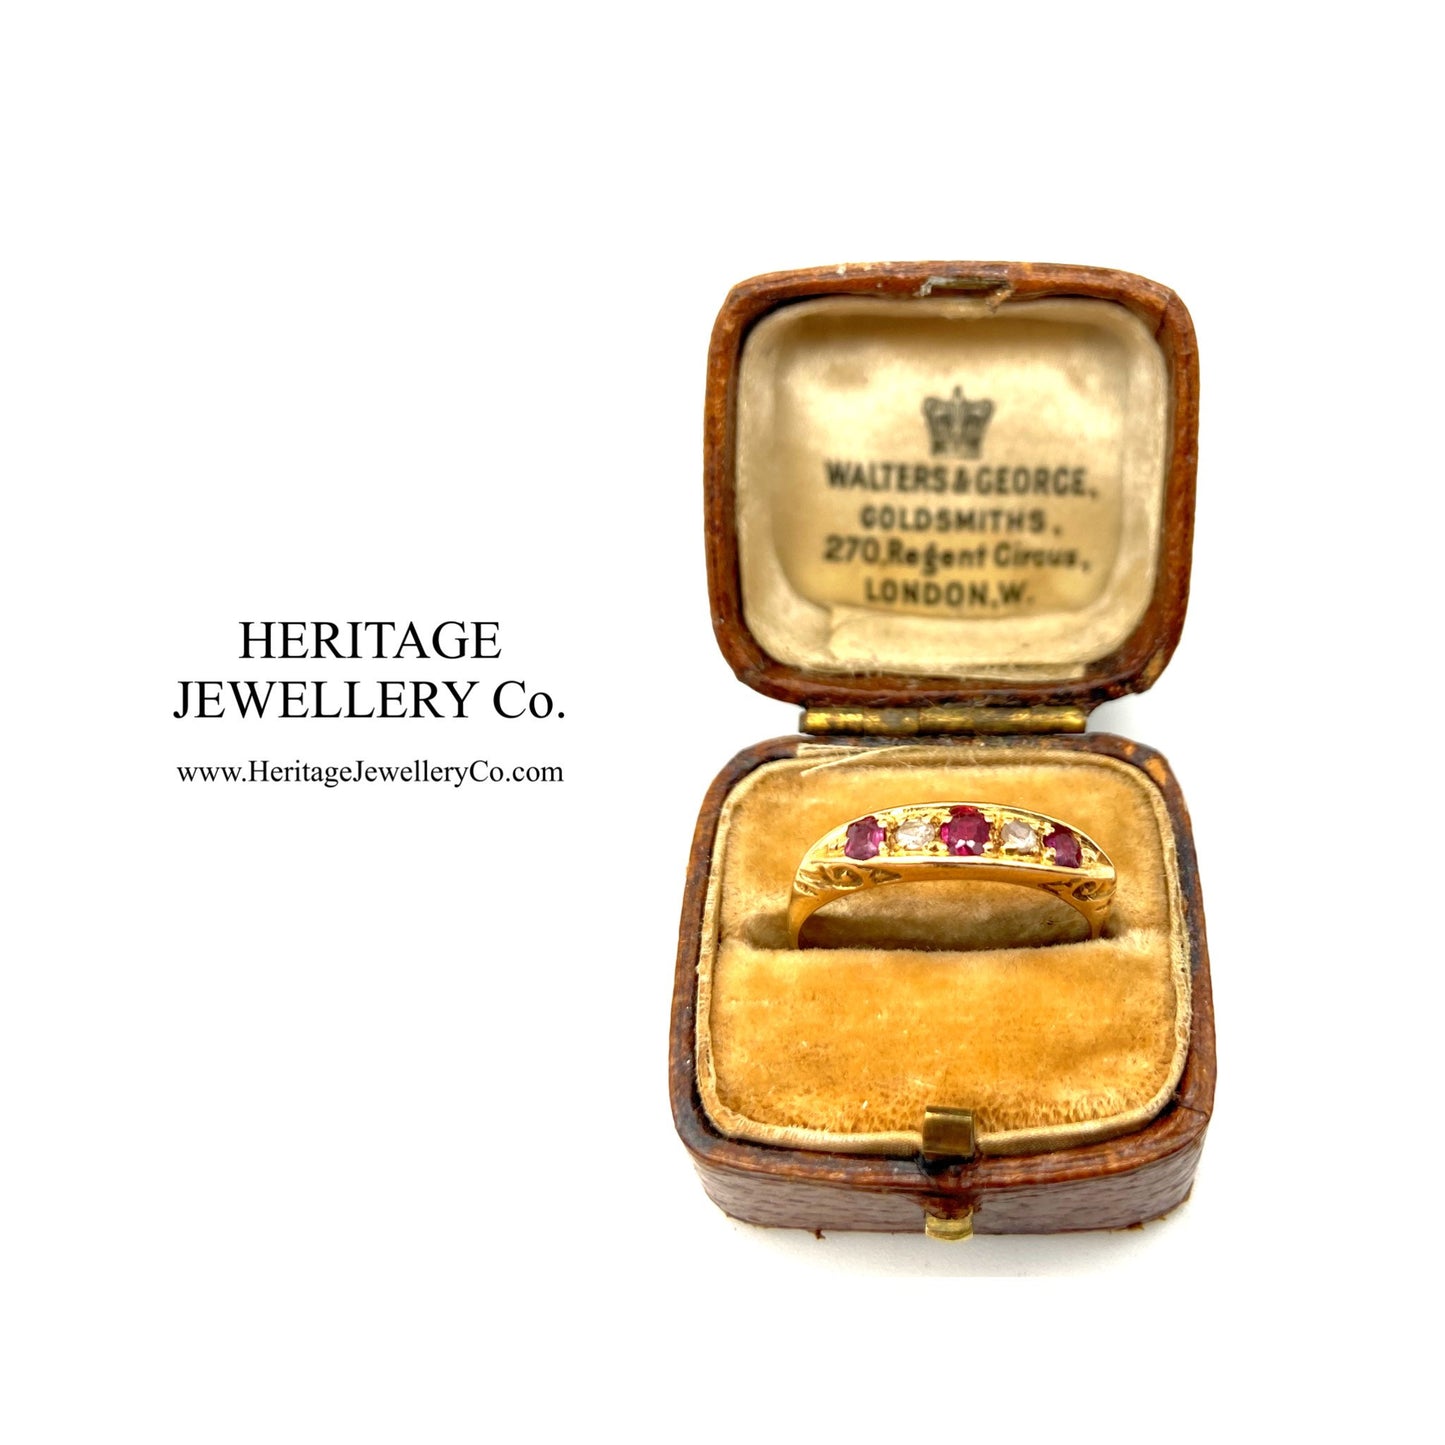 Antique Gold, Ruby and Diamond Ring